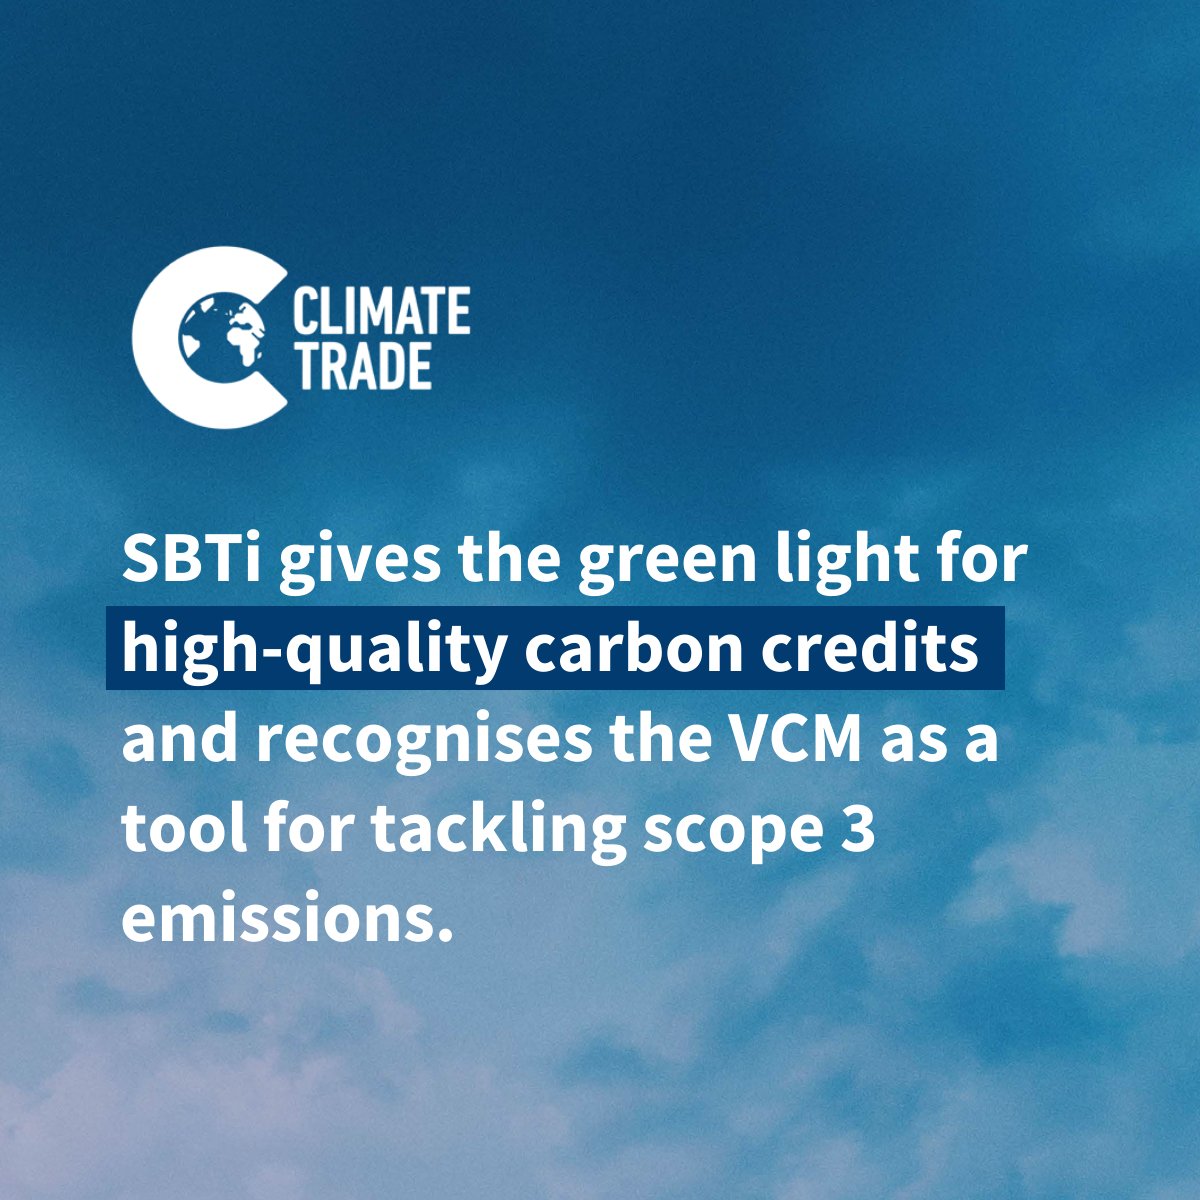 Why's this a gamechanger? #SBTi themselves say it perfectly: 'This step accelerates the decarbonization of value chains with compensation logic while companies make their way to eliminate carbon emissions at the root through innovation and technology improvements.'